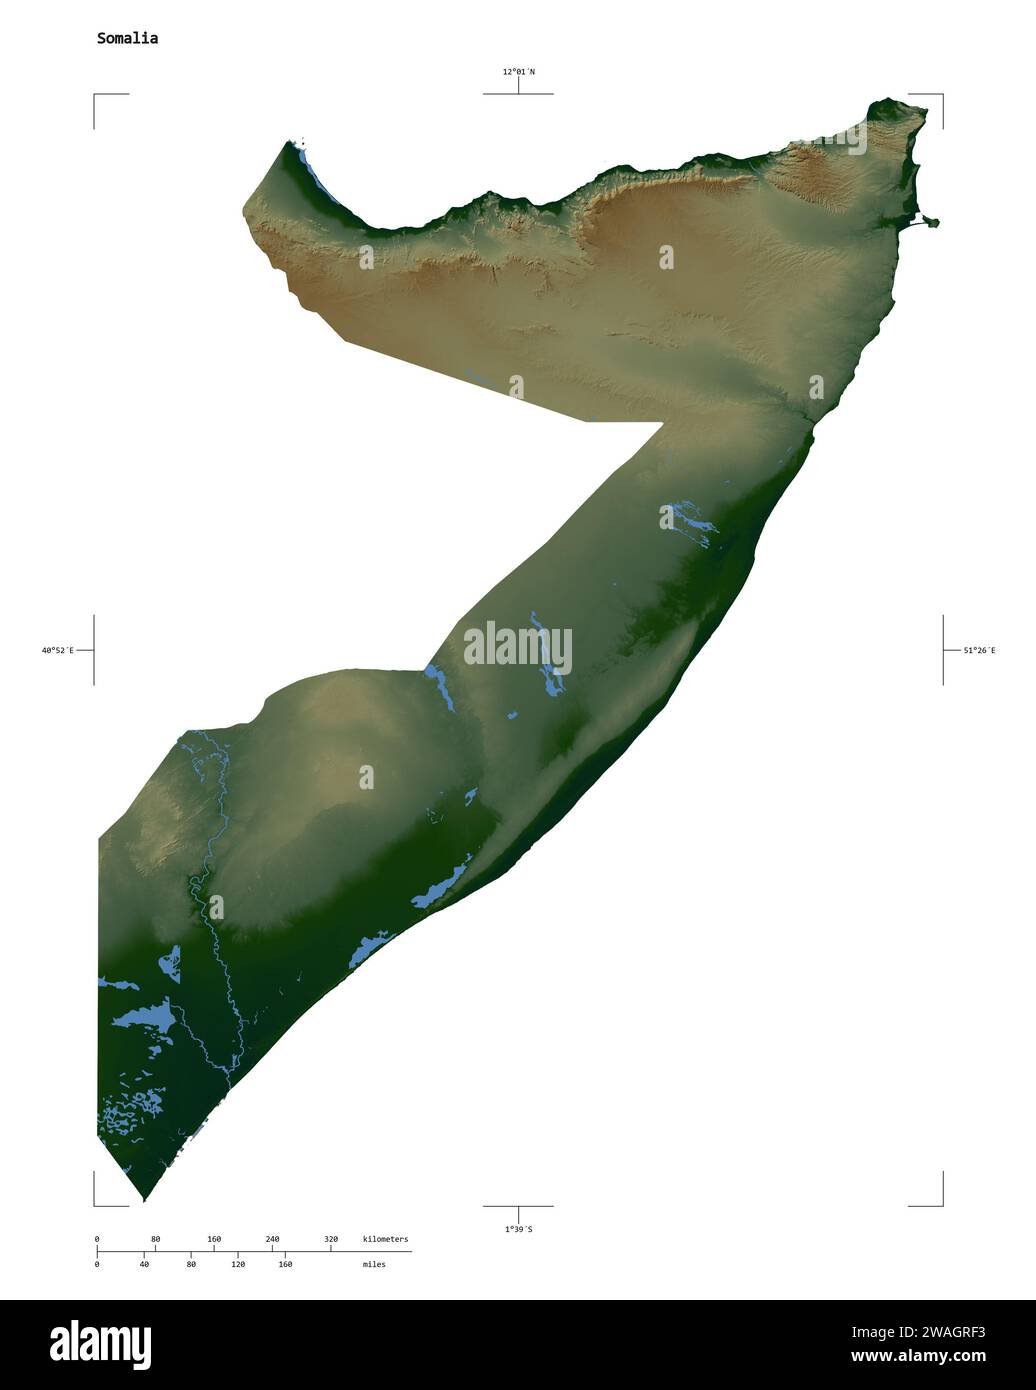 Shape of a Colored elevation map with lakes and rivers of the Somalia, with distance scale and map border coordinates, isolated on white Stock Photo